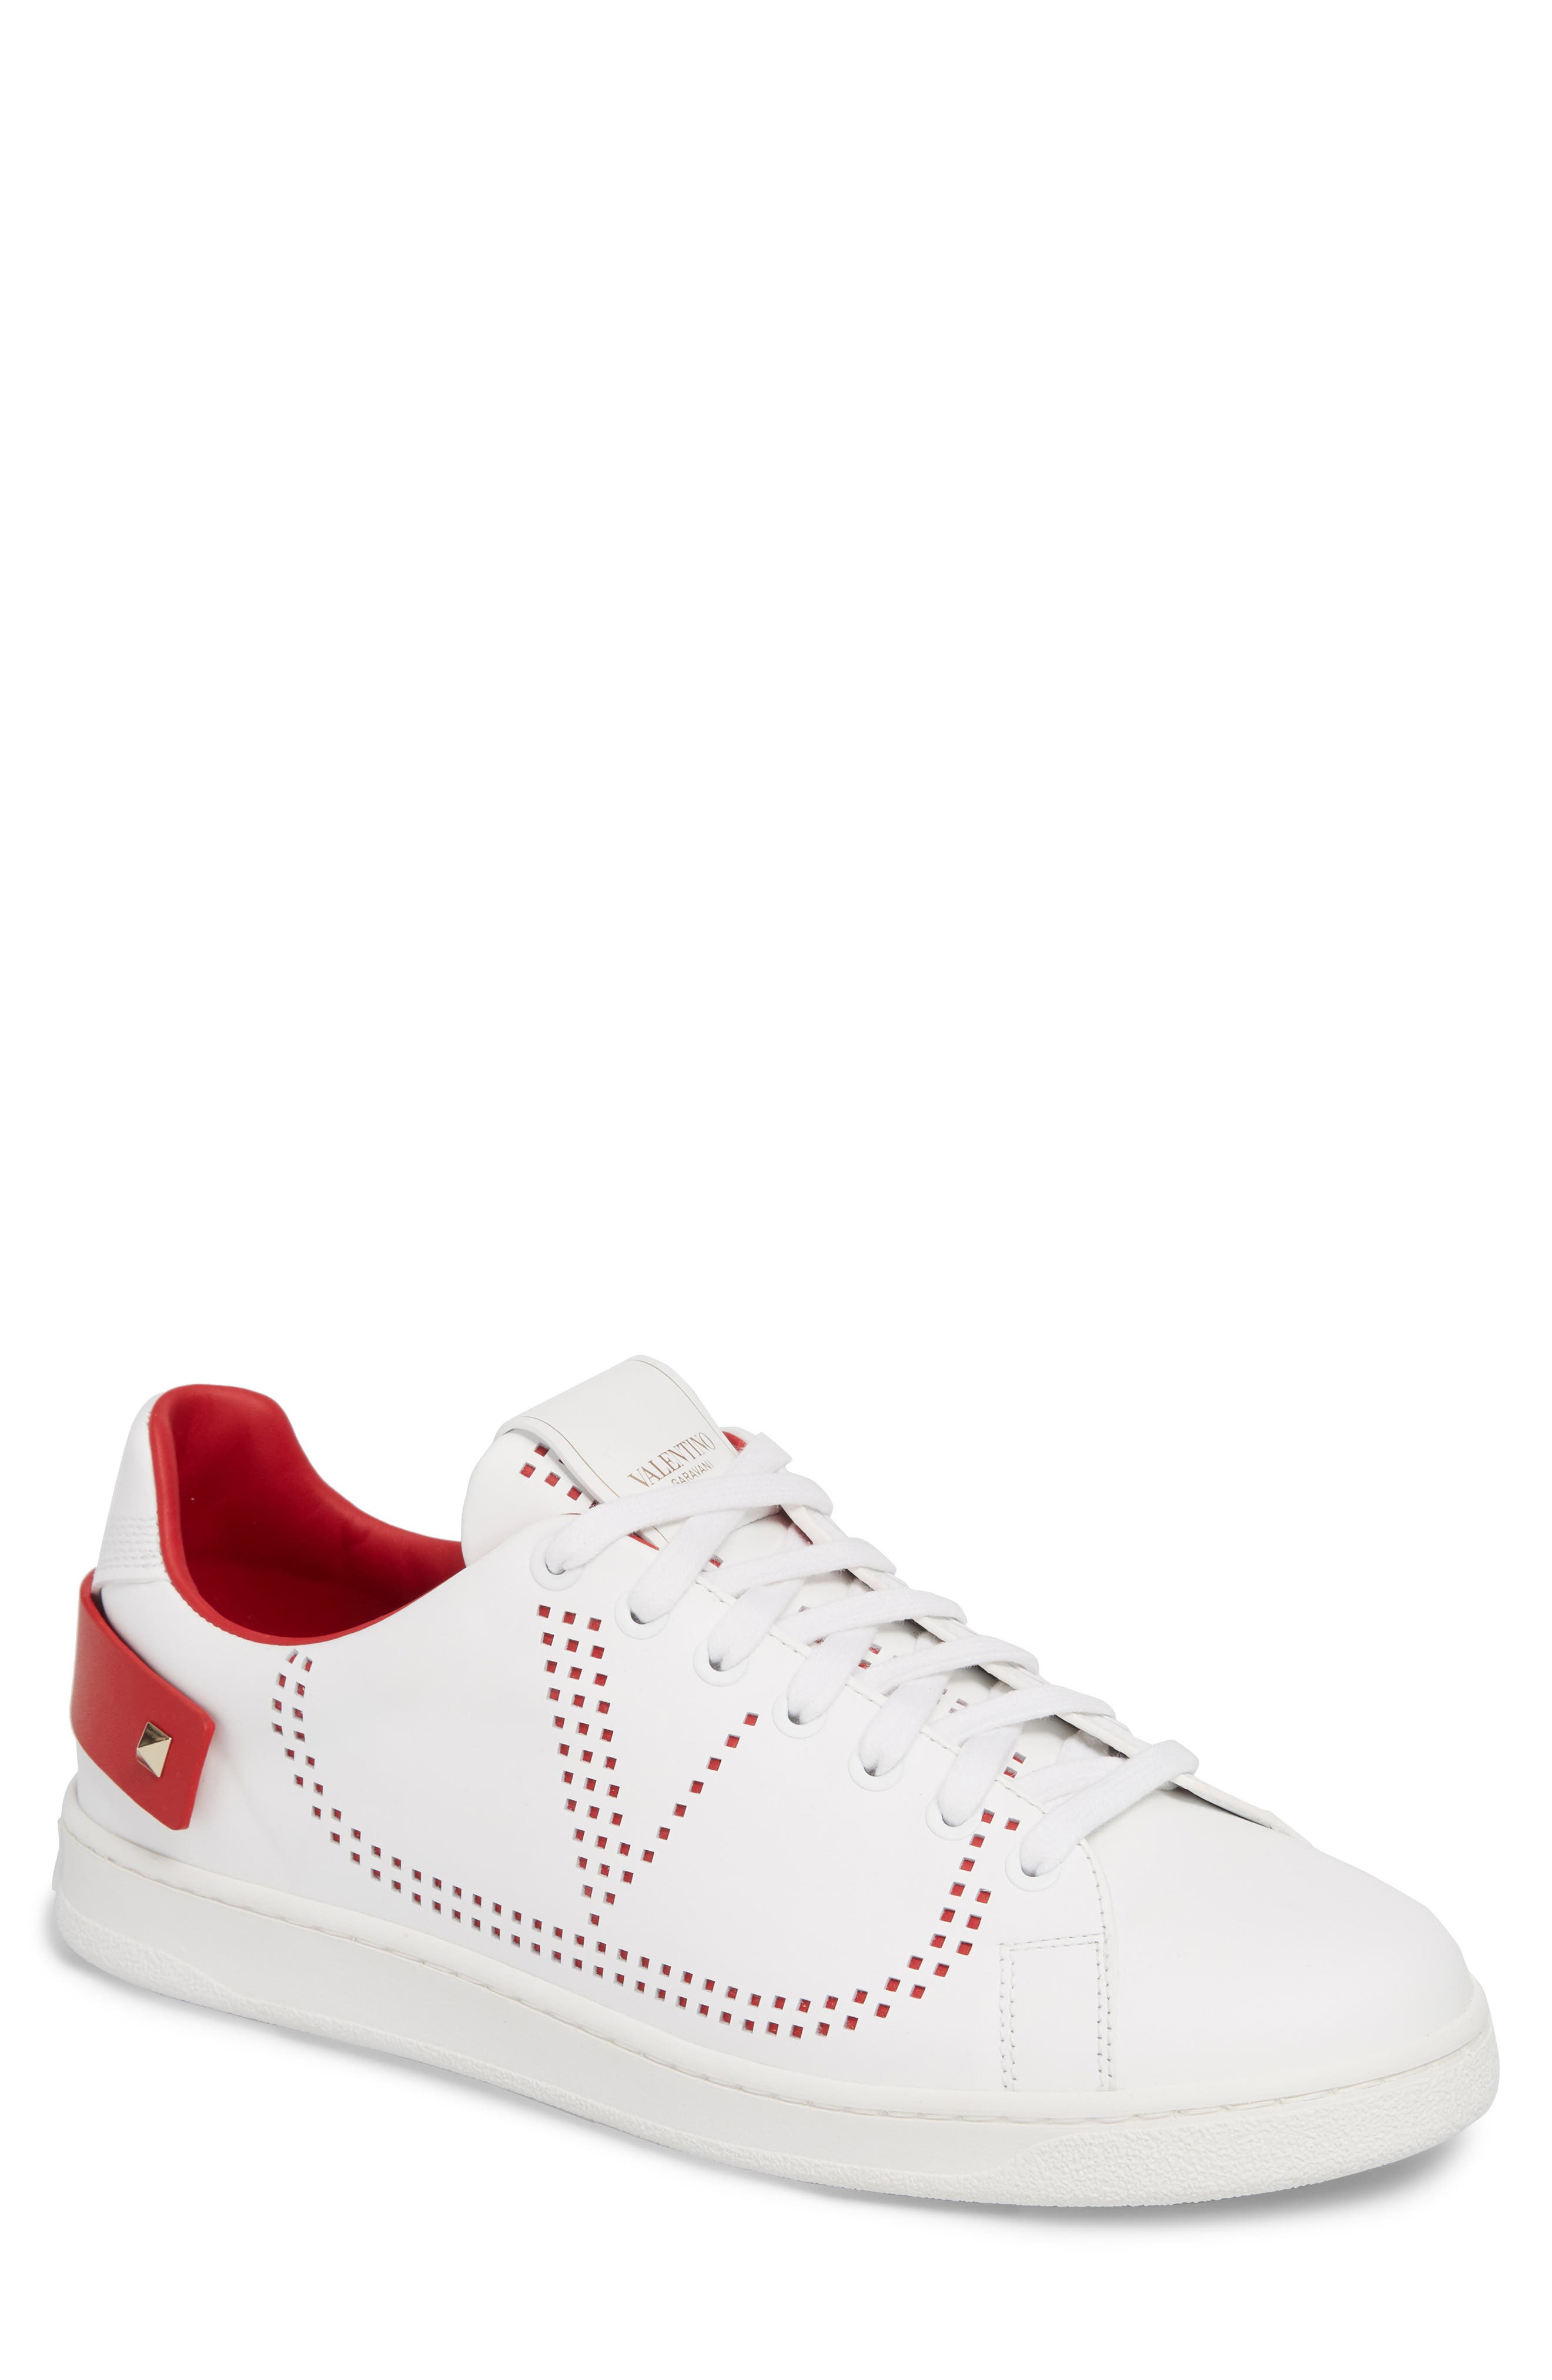 red valentino mens shoes